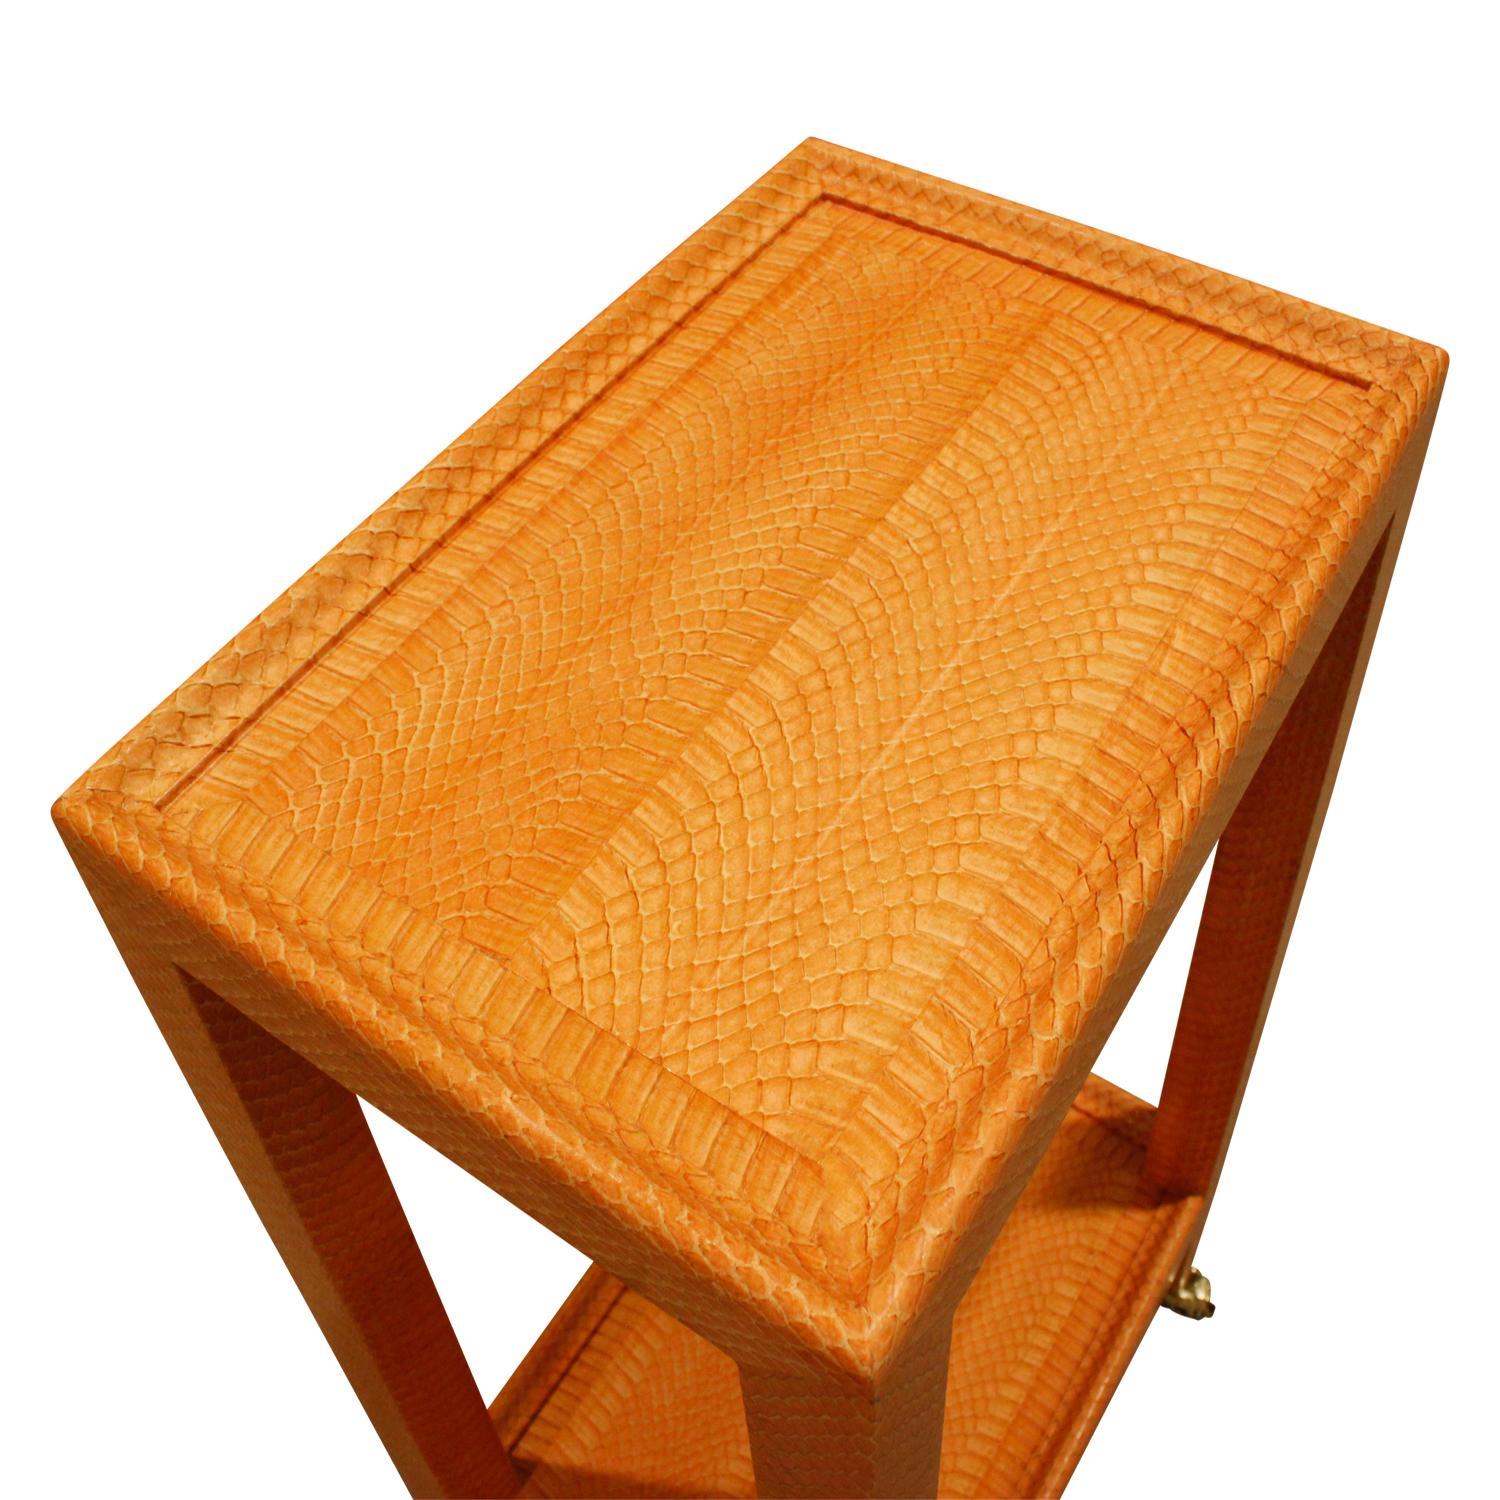 American Mary Forssberg Nesting Telephone Tables in Apricot Python 2019 'Signed'